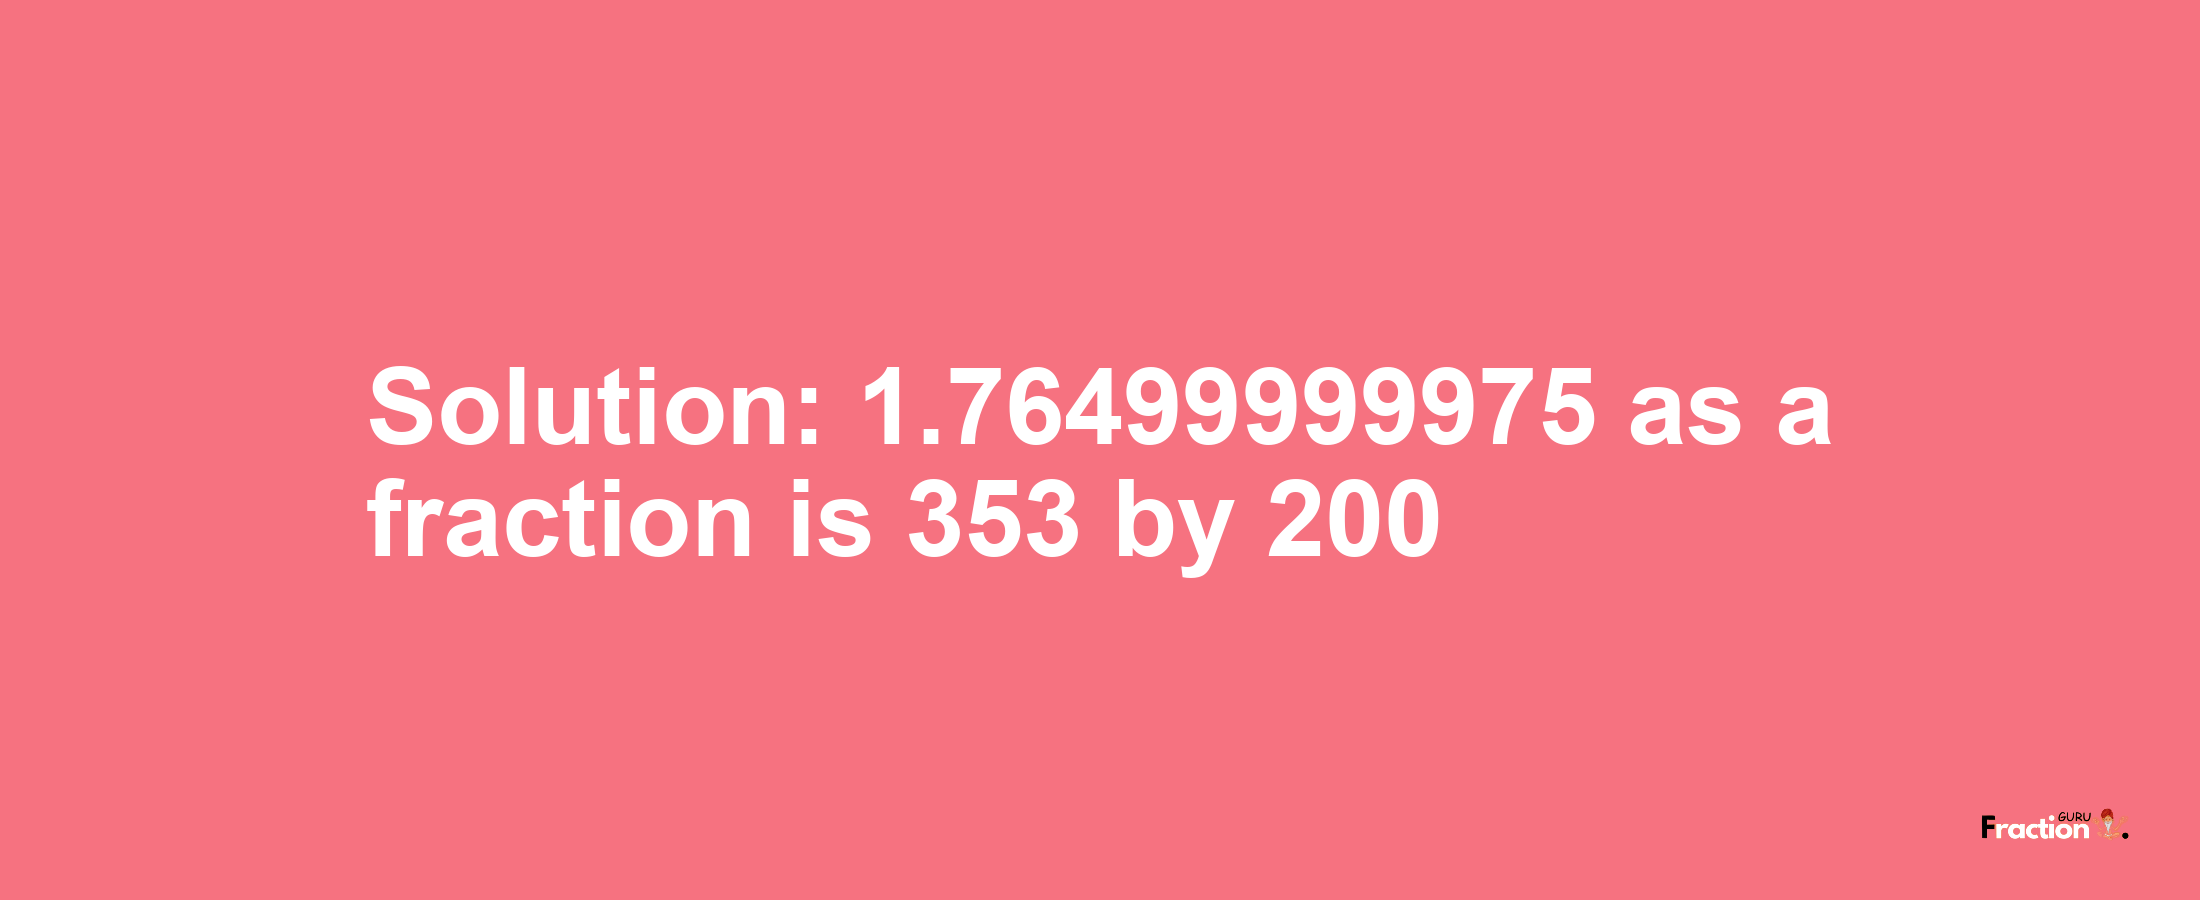 Solution:1.76499999975 as a fraction is 353/200